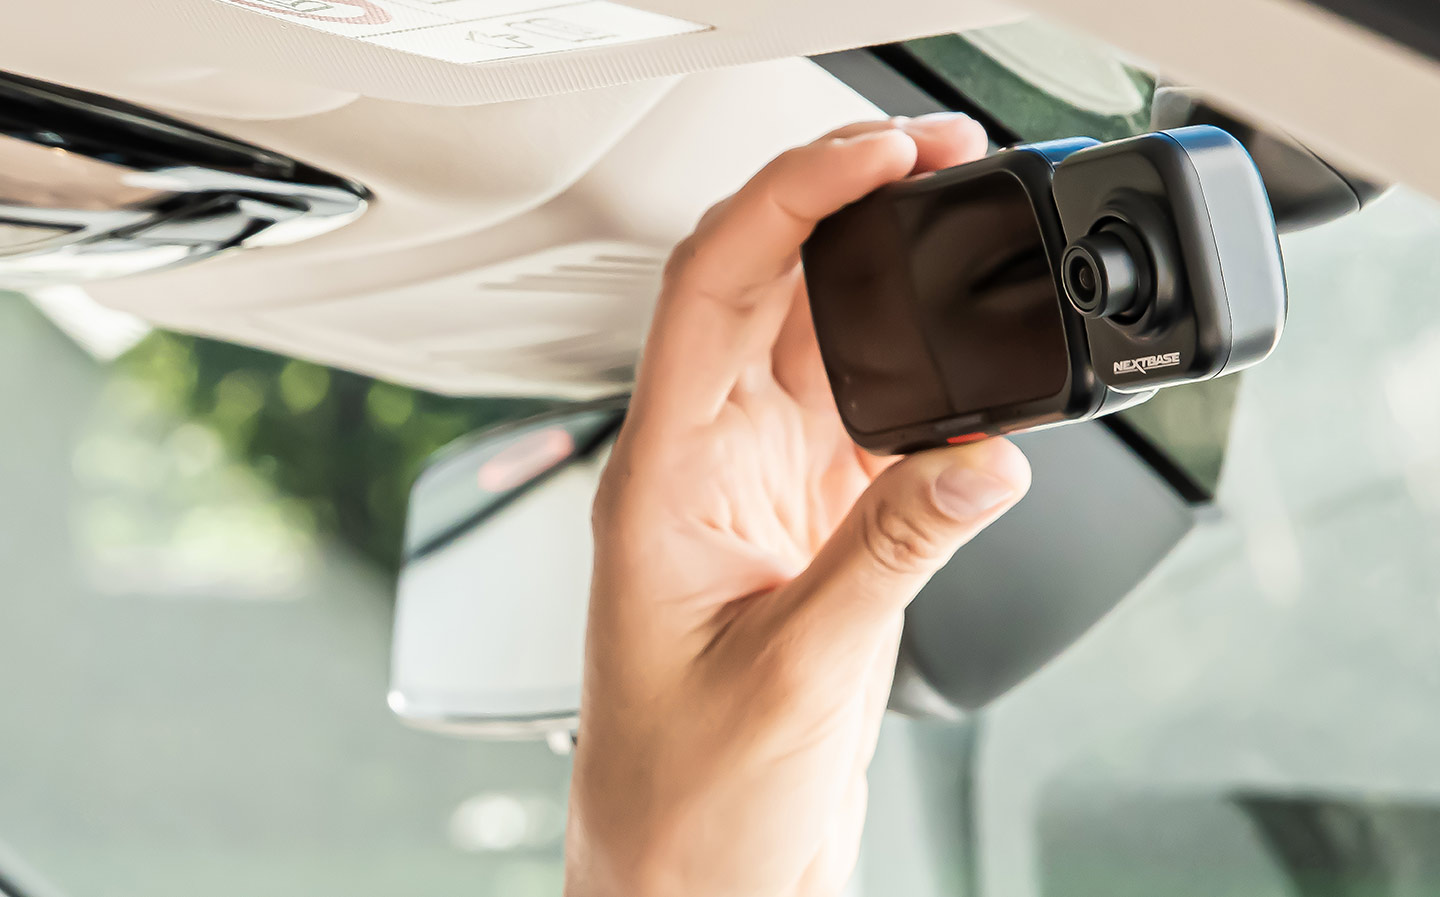 Dash cam scrappage scheme launched at Halfords